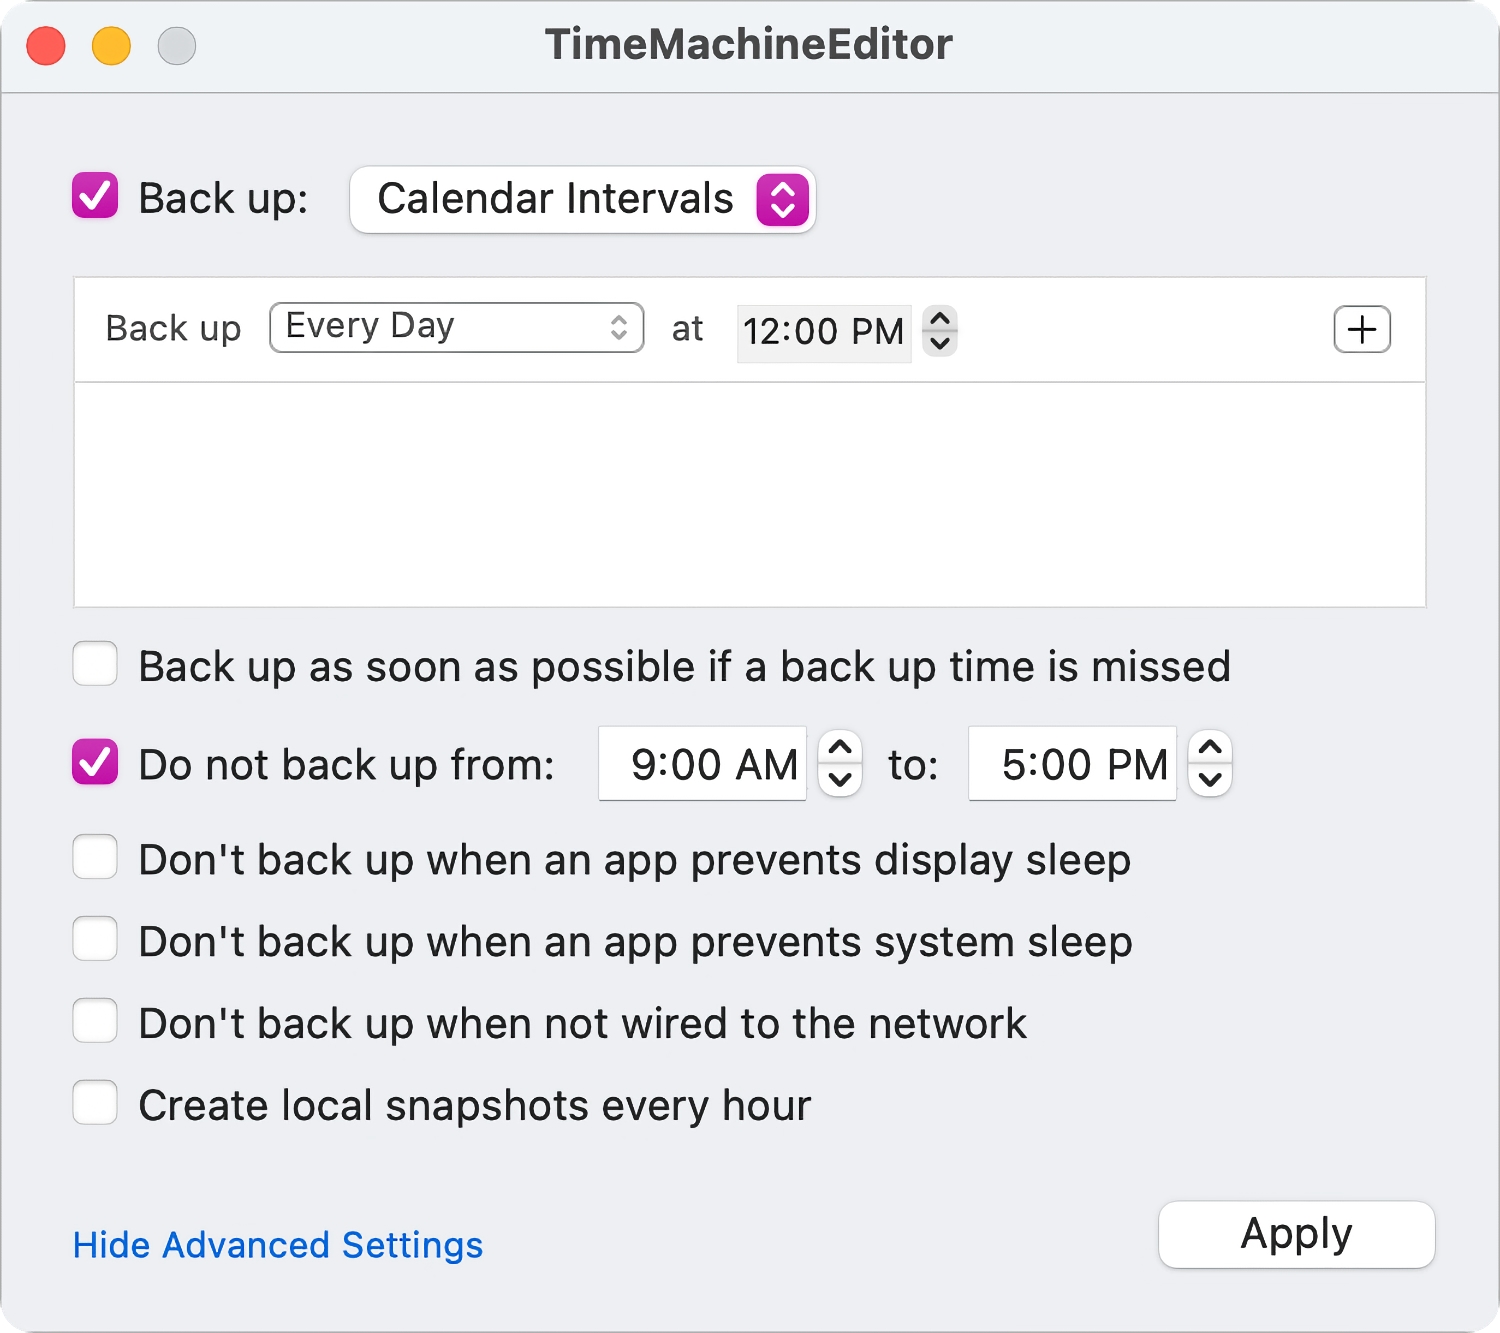 does timemachineeditor work with mojave